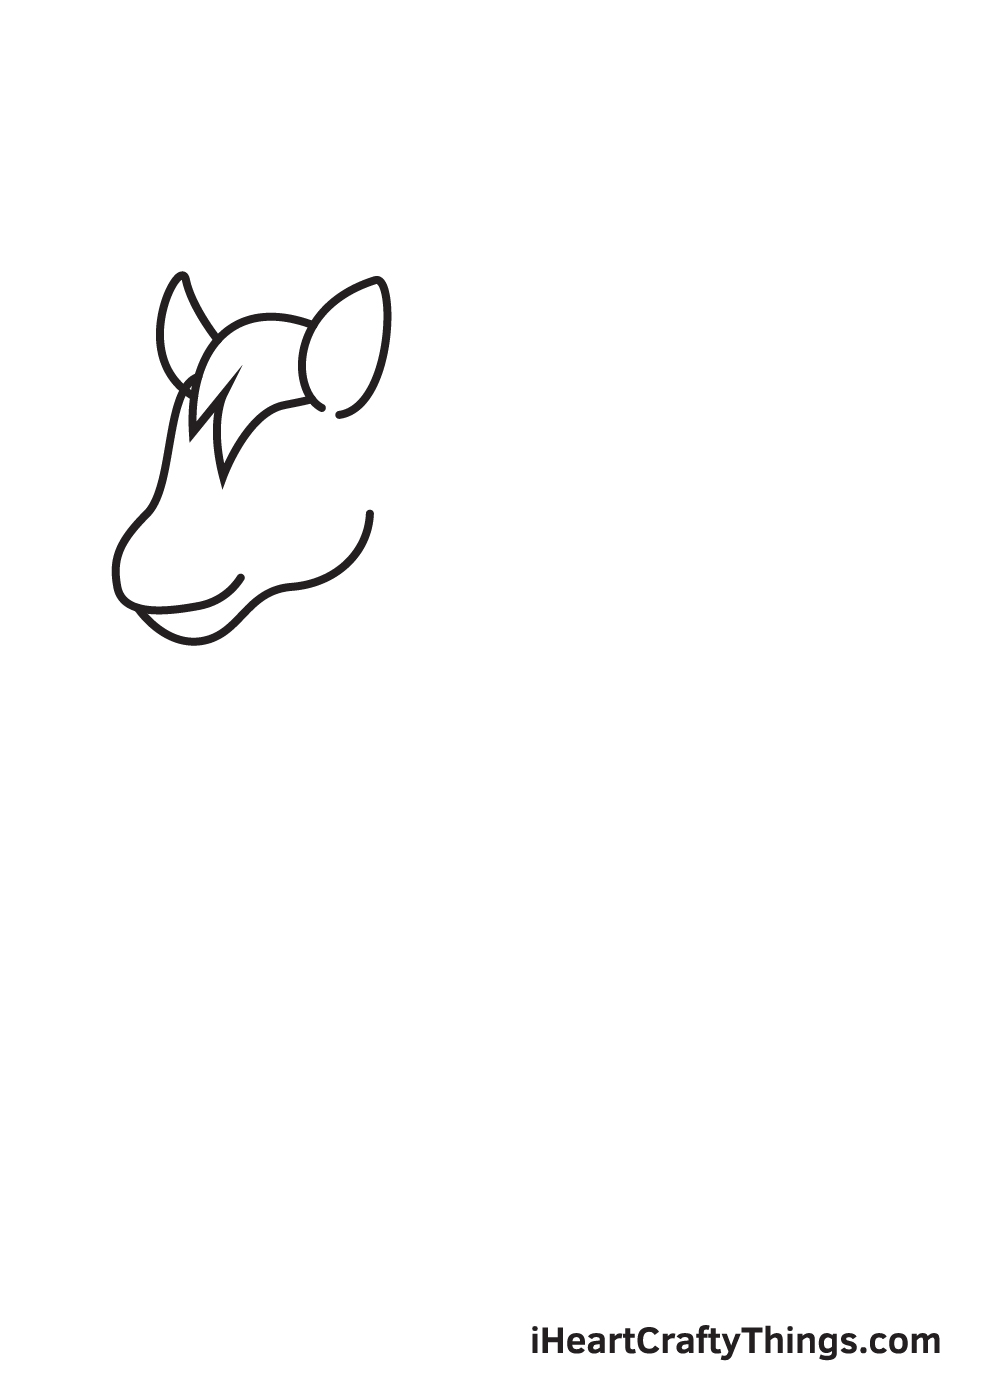 horse drawing - step 2